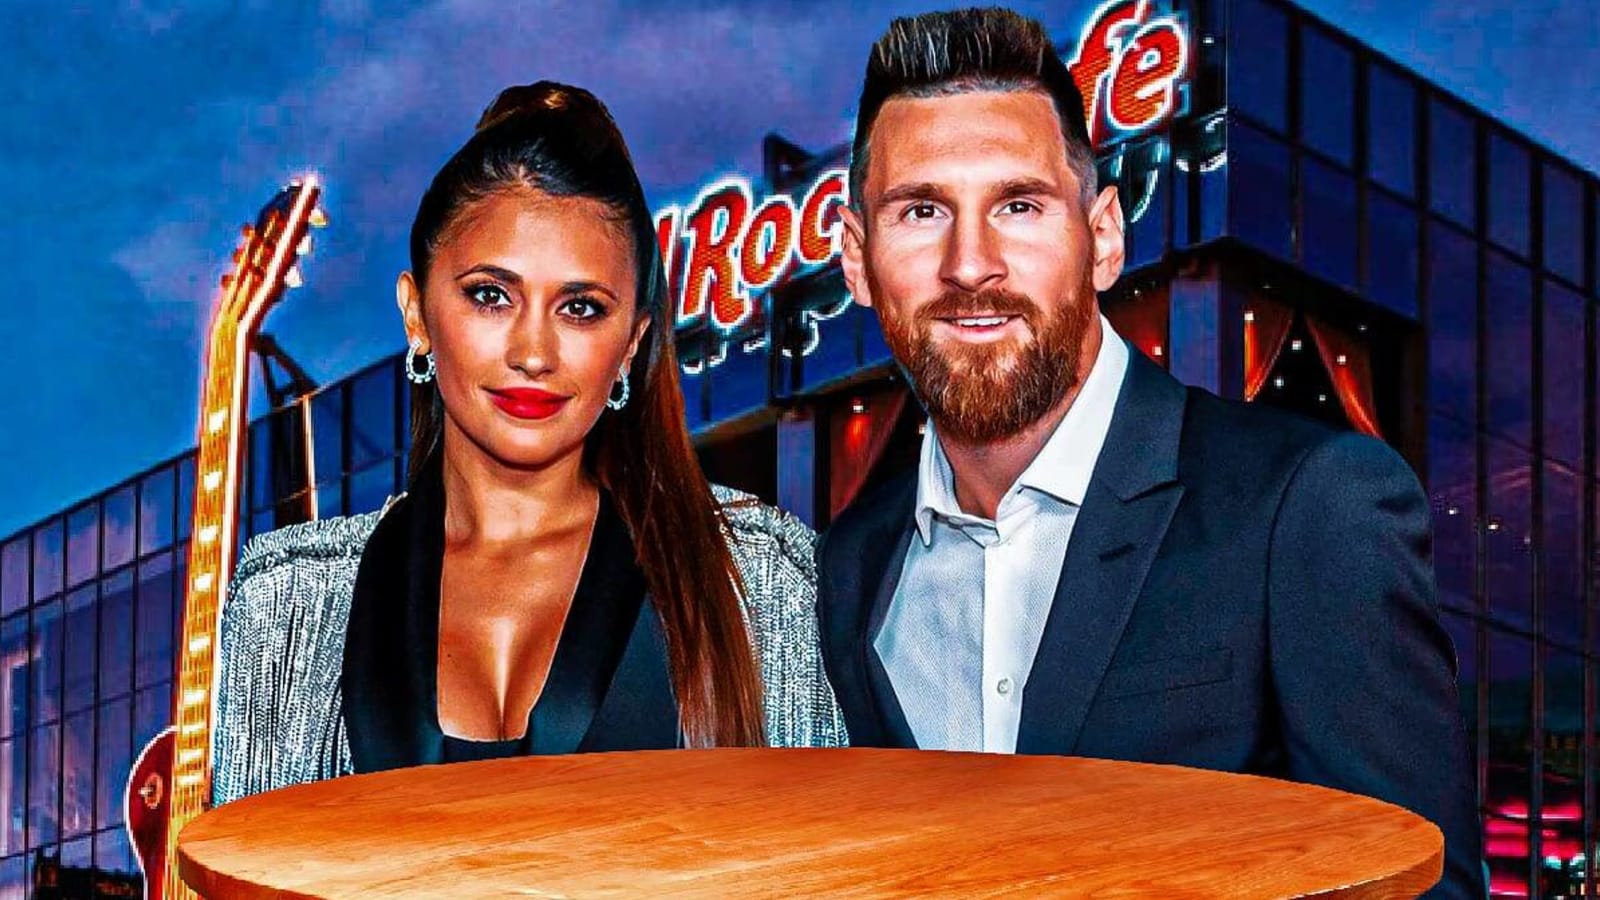 Lionel Messi and wife Antonela Roccuzzo goes out to Hard Rock Cafe with Luis Suarez